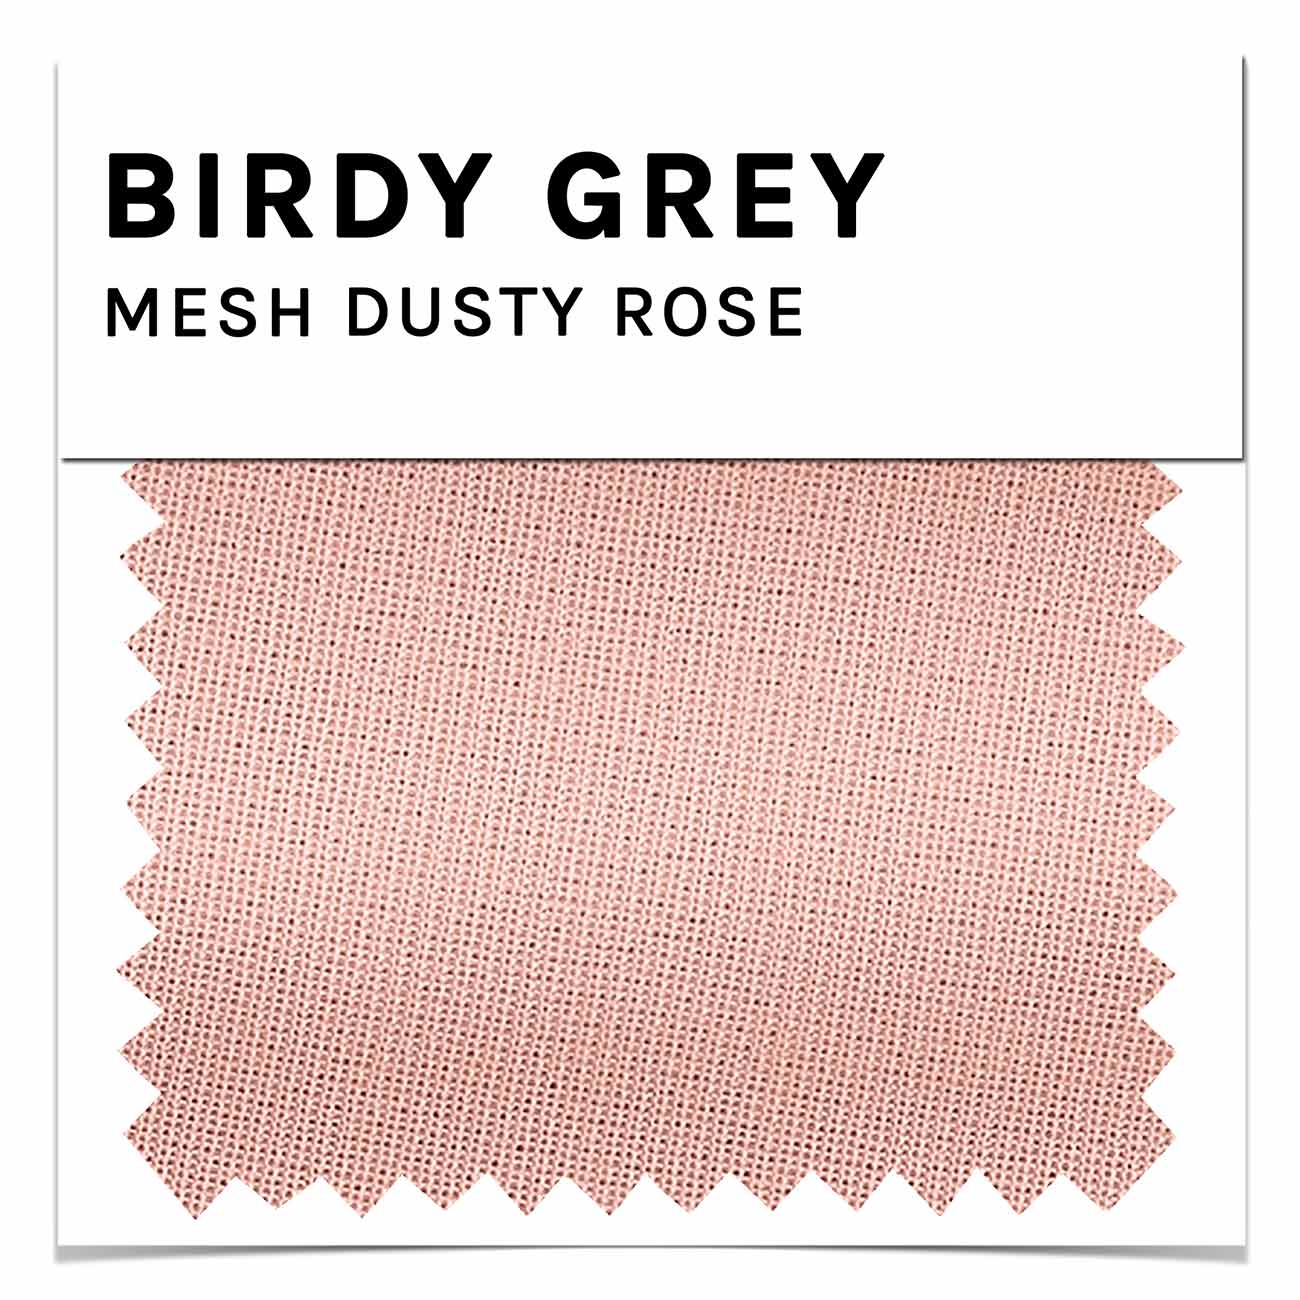 Posting my Birdy Grey dress swatches in case it's helpful for